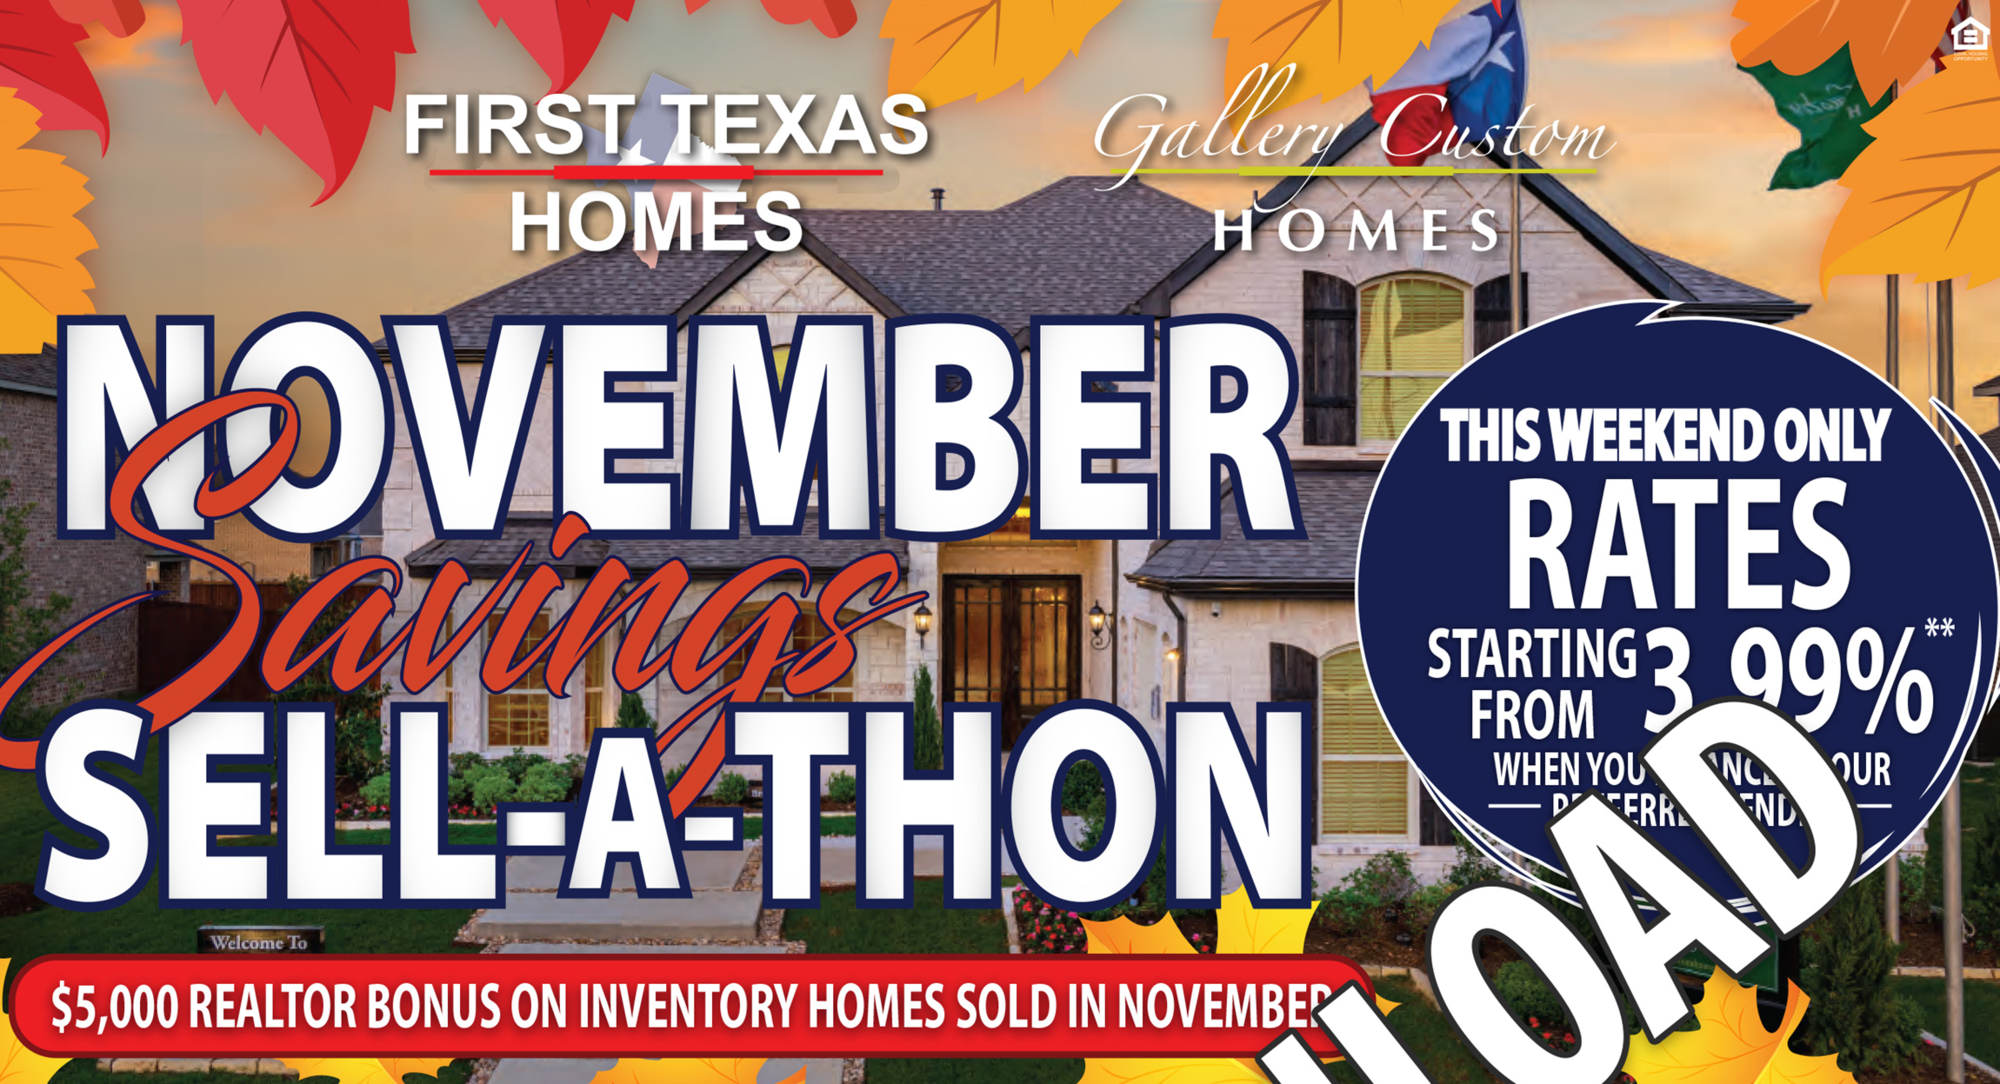 First Texas Builder Homes For Sale in Dallas Fort Worth, TX - Discounts & Incentives